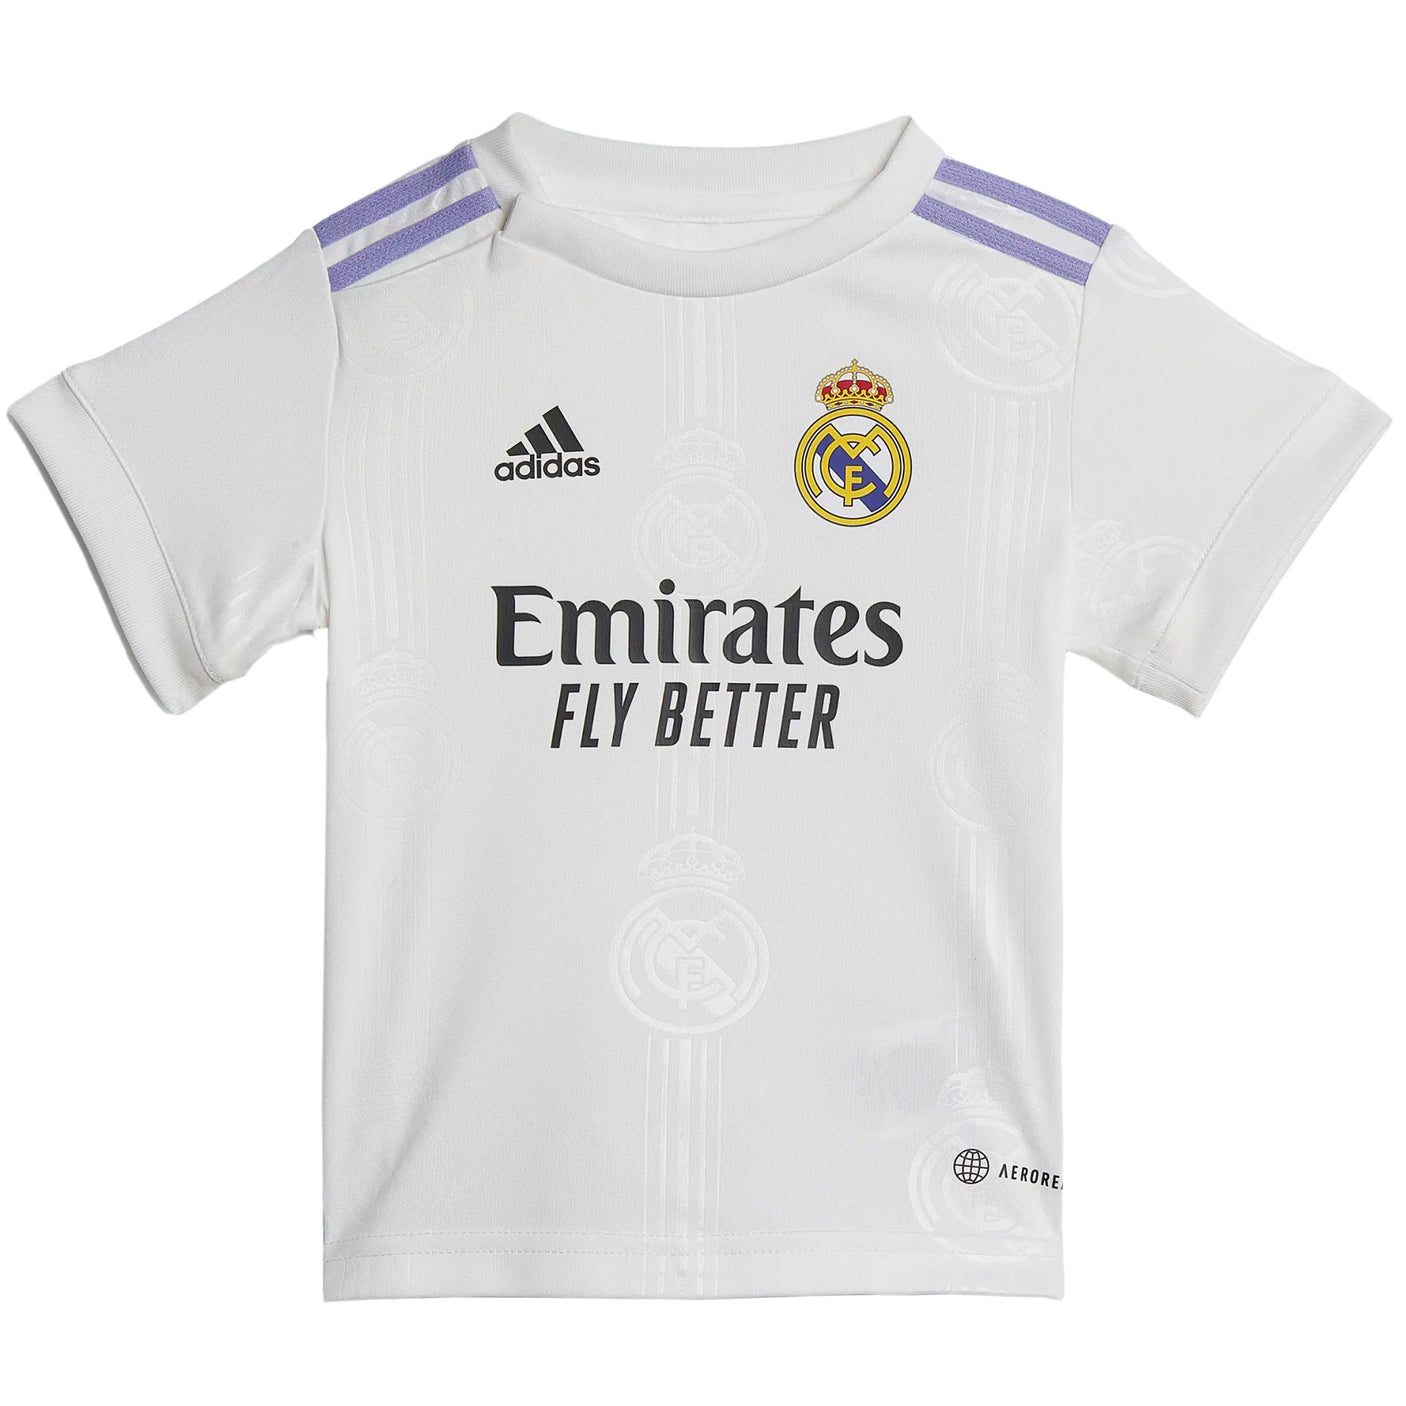 Real Madrid baby/newborn clothes Real Madrid baby gift